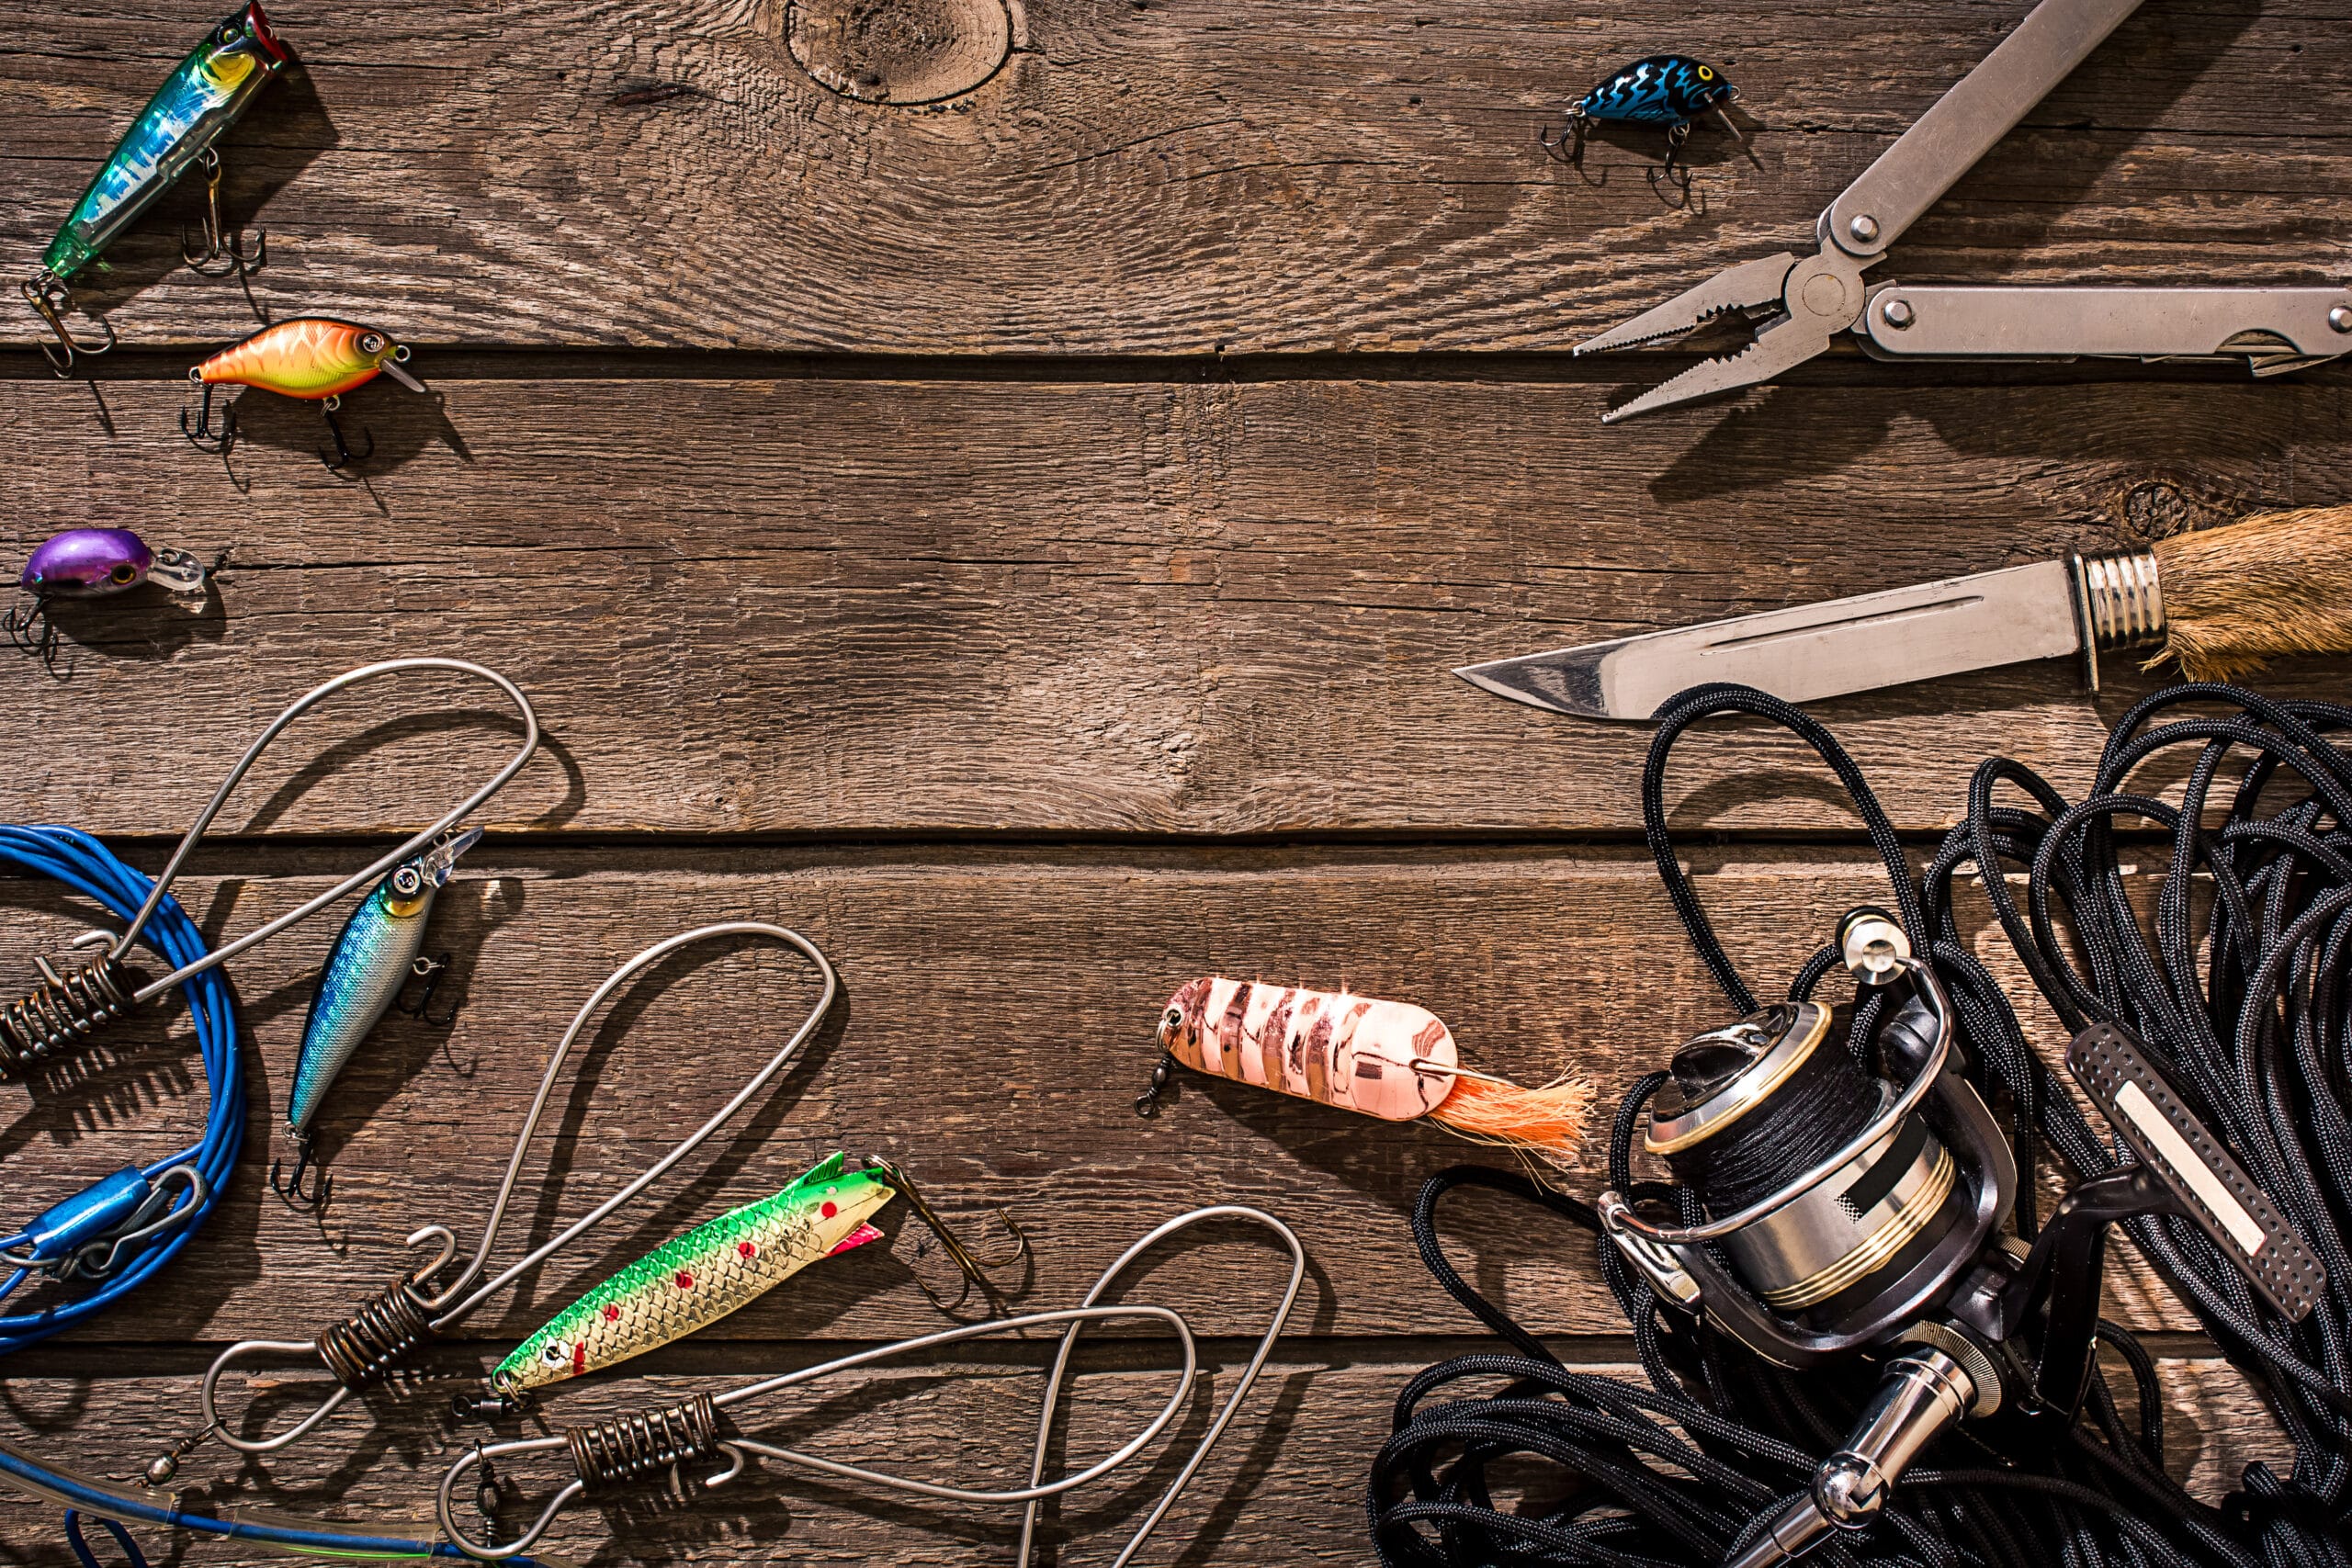 fanatic4fishing.com : What is the best knot for saltwater fishing?